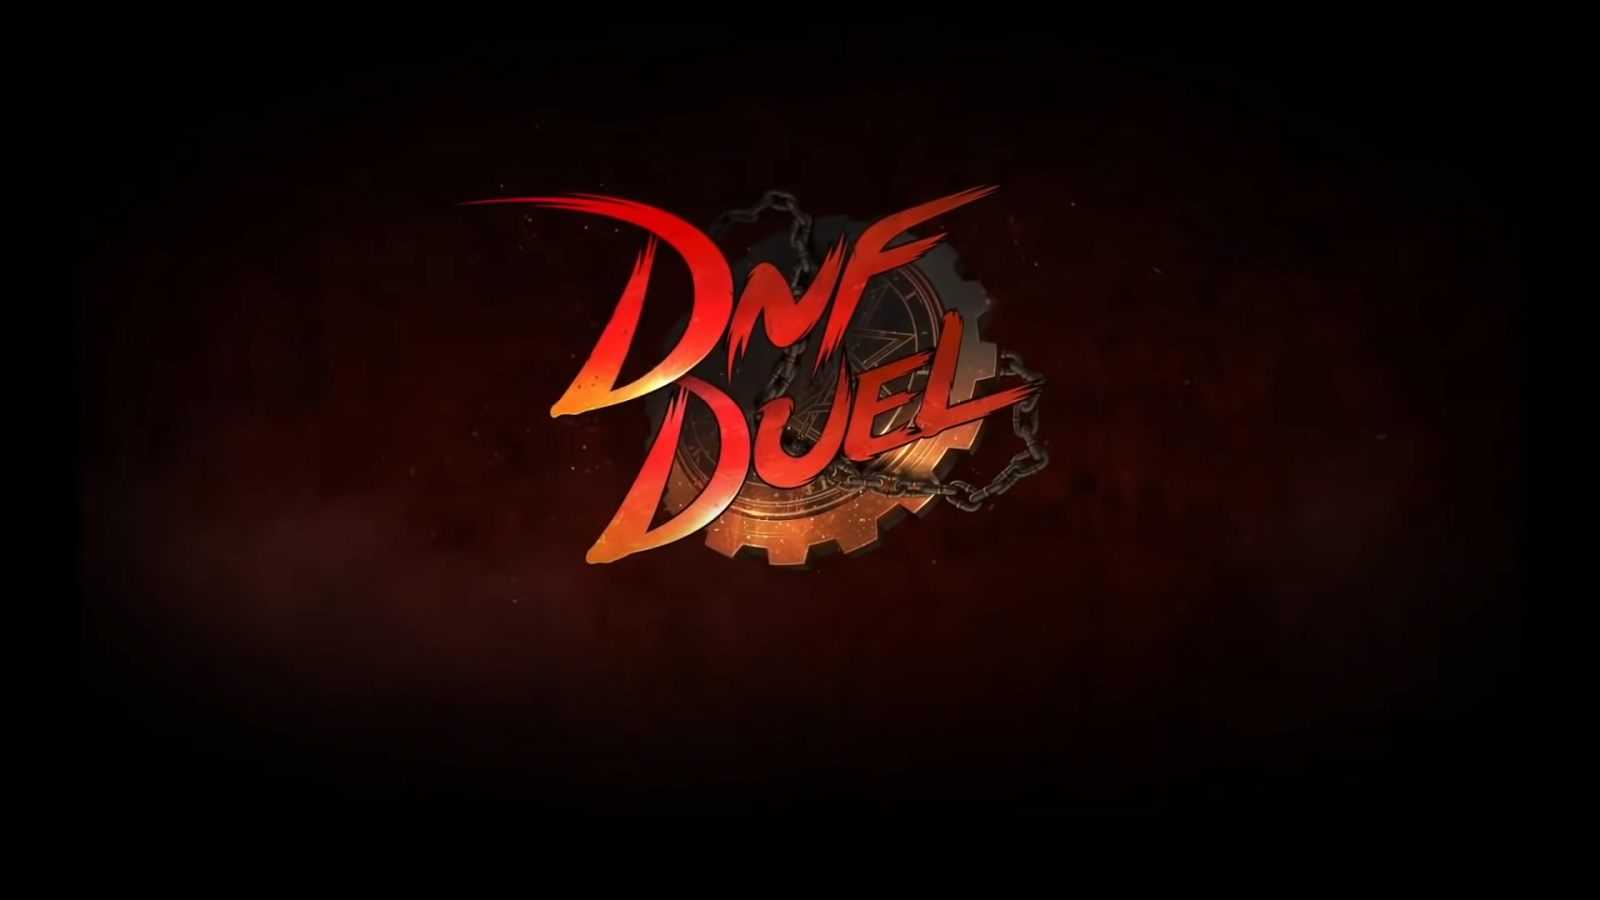 dnf duel season pass download free